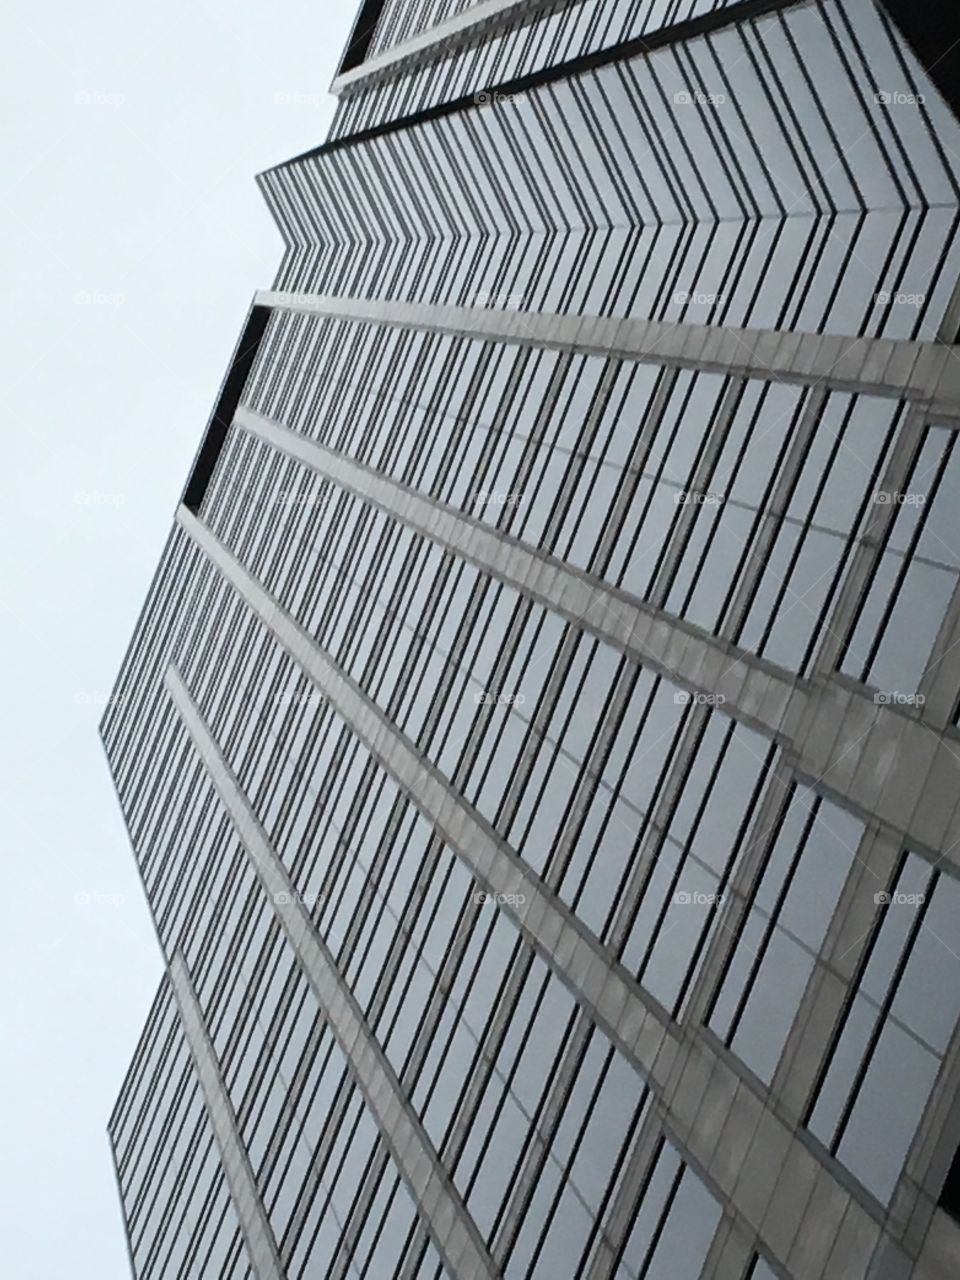 Perspective of a Building 